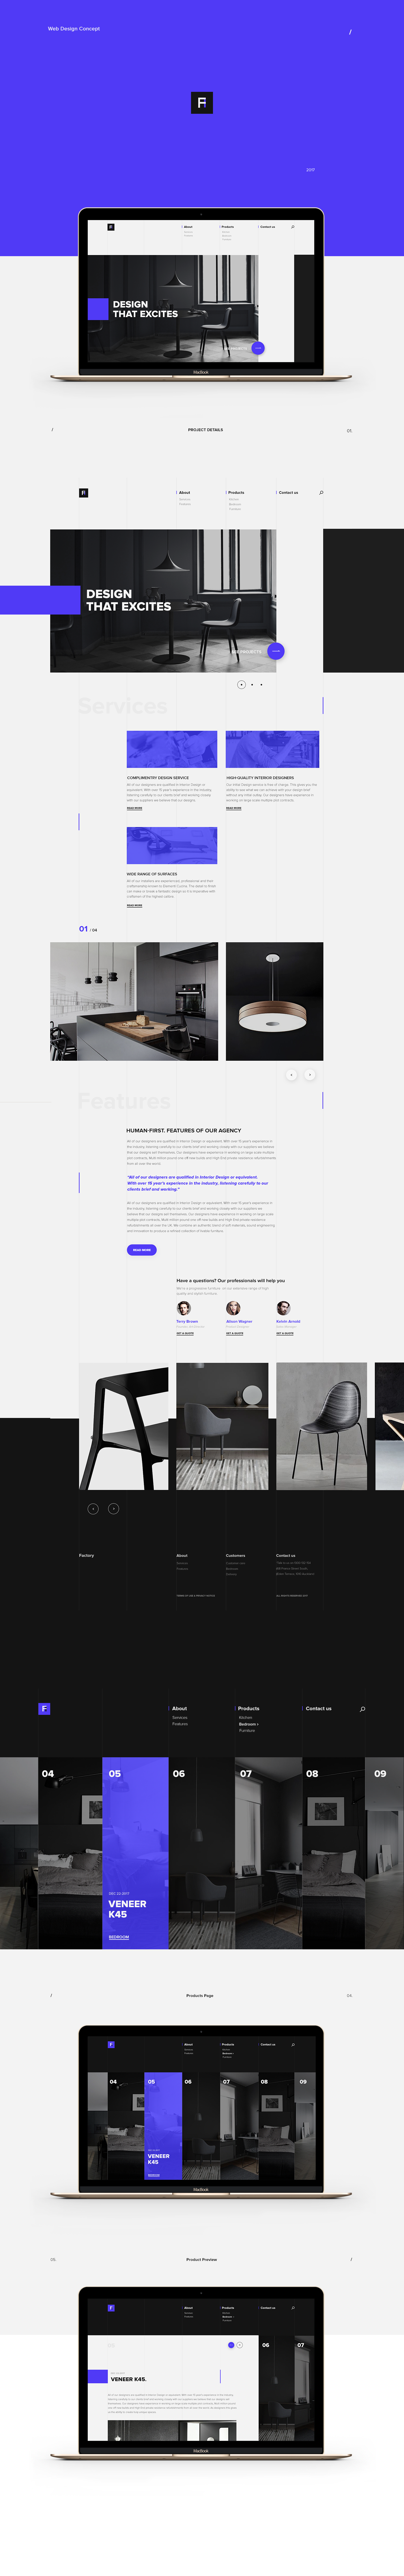 design Layout clean simple concept UI ux Style template product